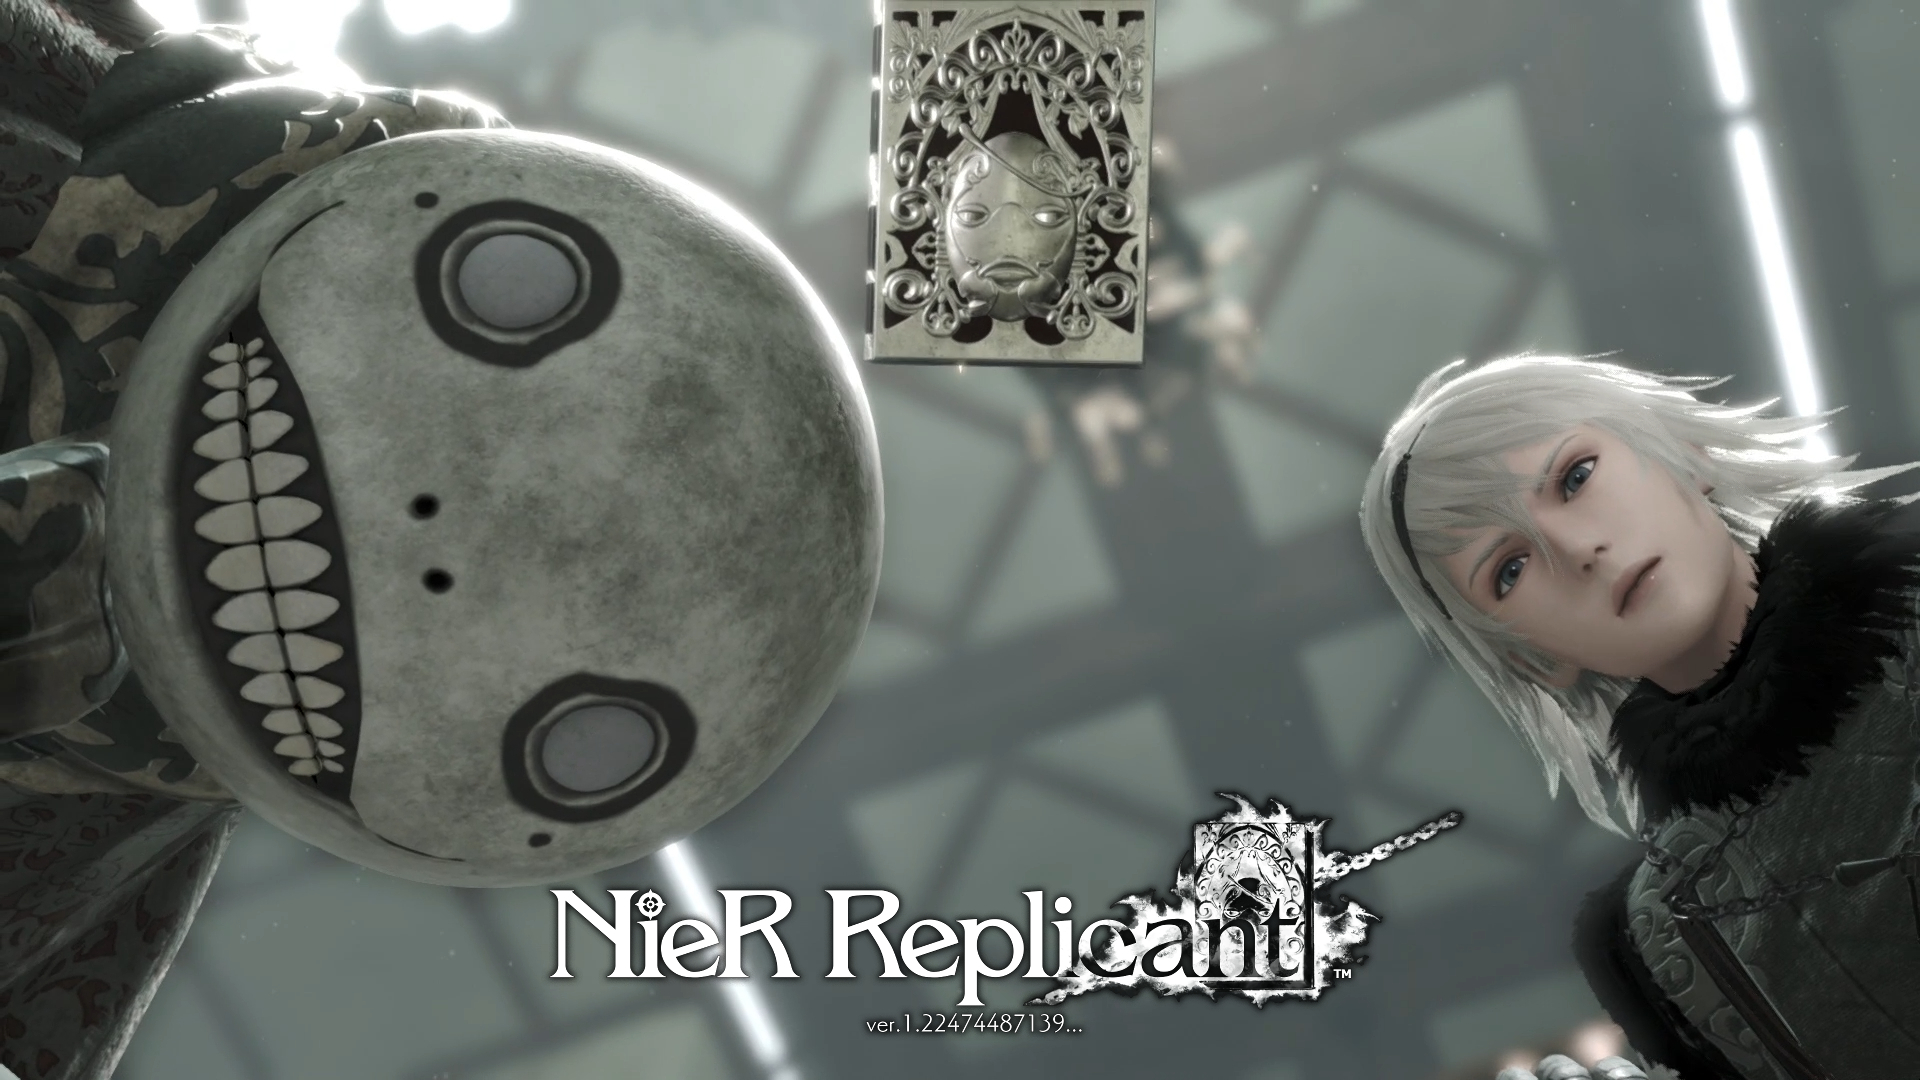 NieR Replicant Upgrade Announced for PC/PS4/XO; Will Feature Fully Voiced,  Re-recorded Voices and New Characters